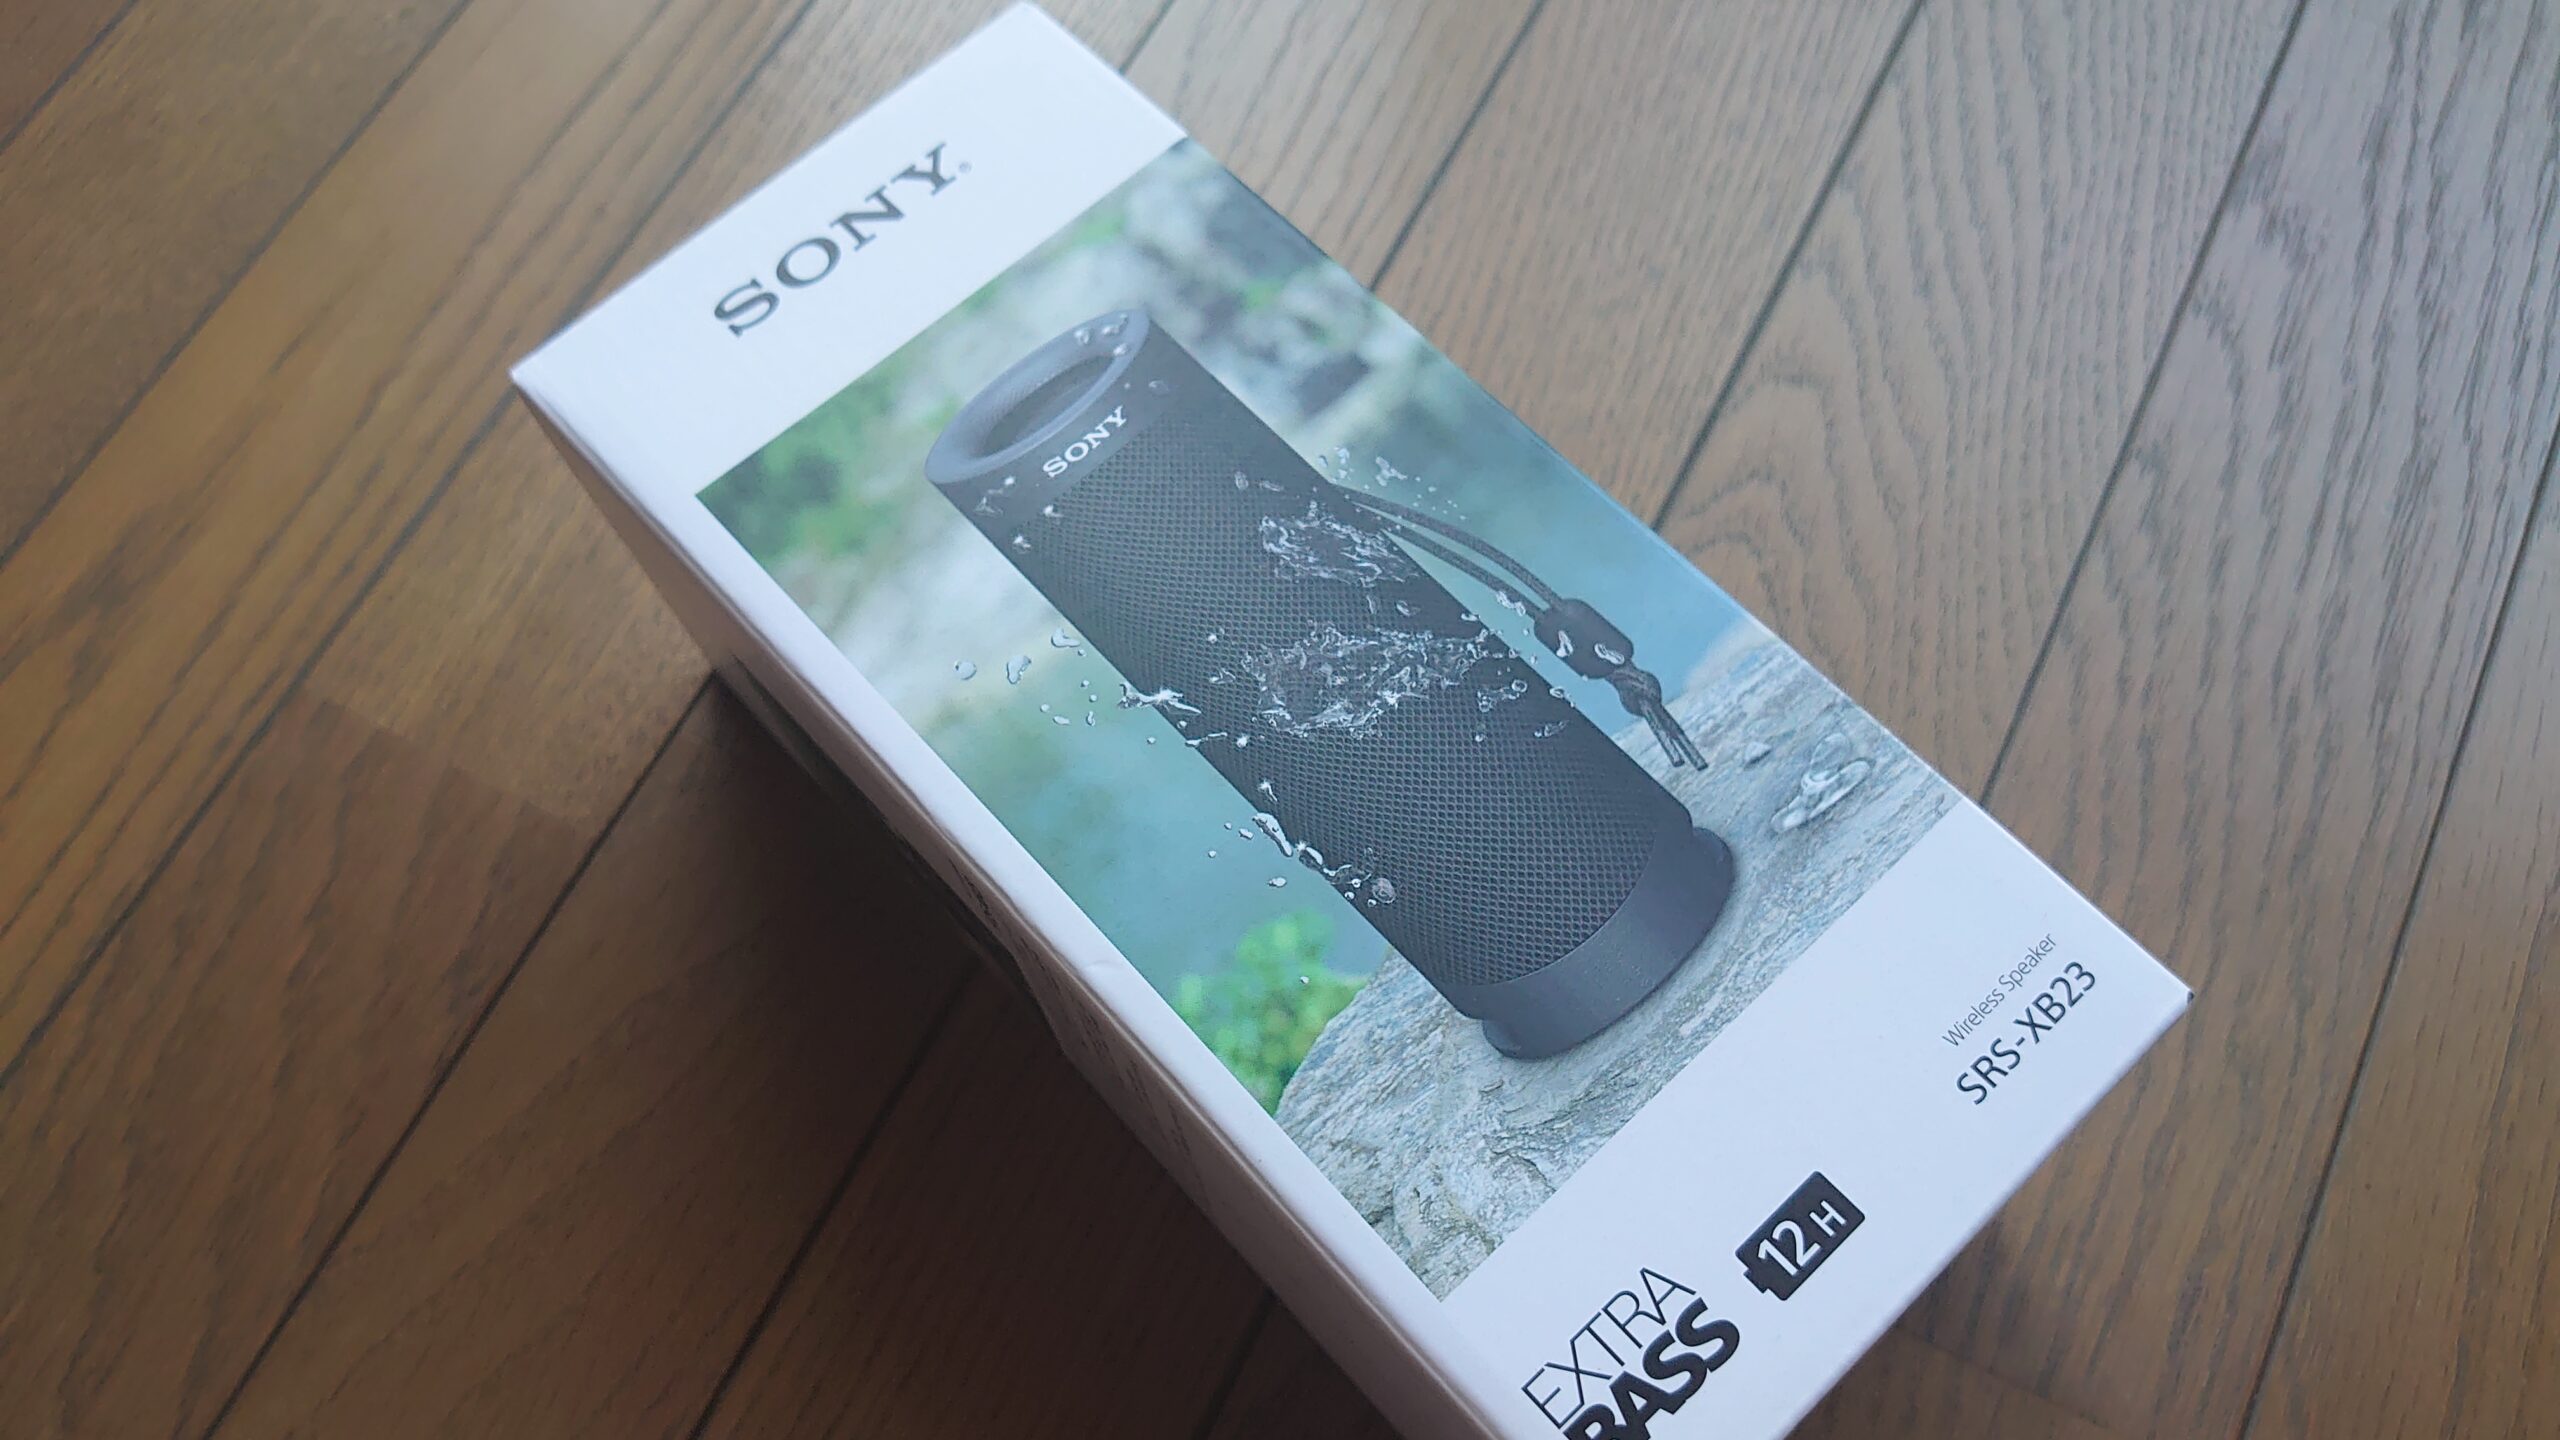 SONYのワイヤレススピーカーSRS-XB23